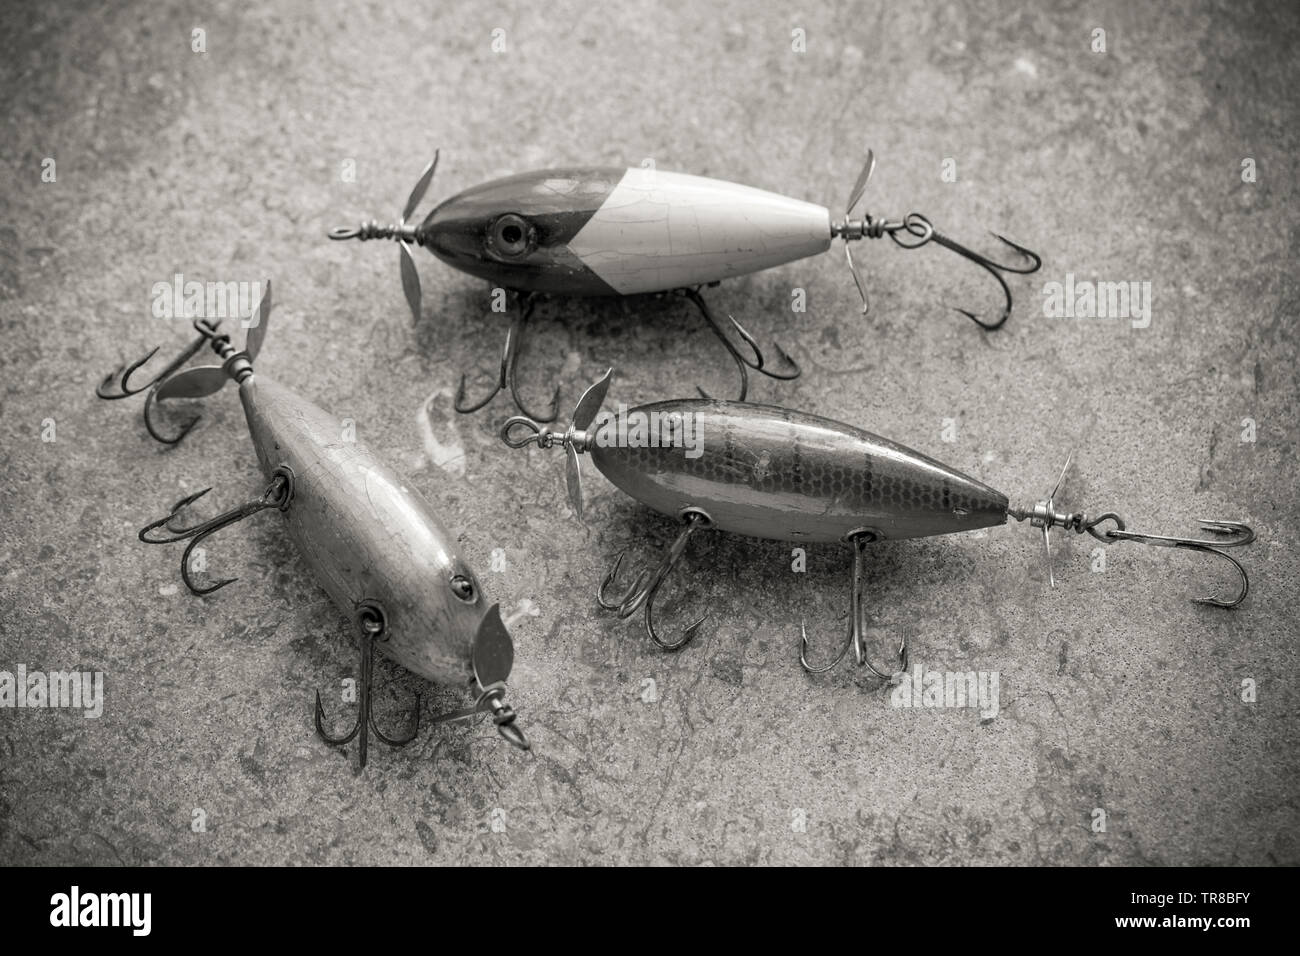 Three old South Bend fishing lures photographed on a stone background. Lures such as these are often called plugs these being equipped with three larg Stock Photo